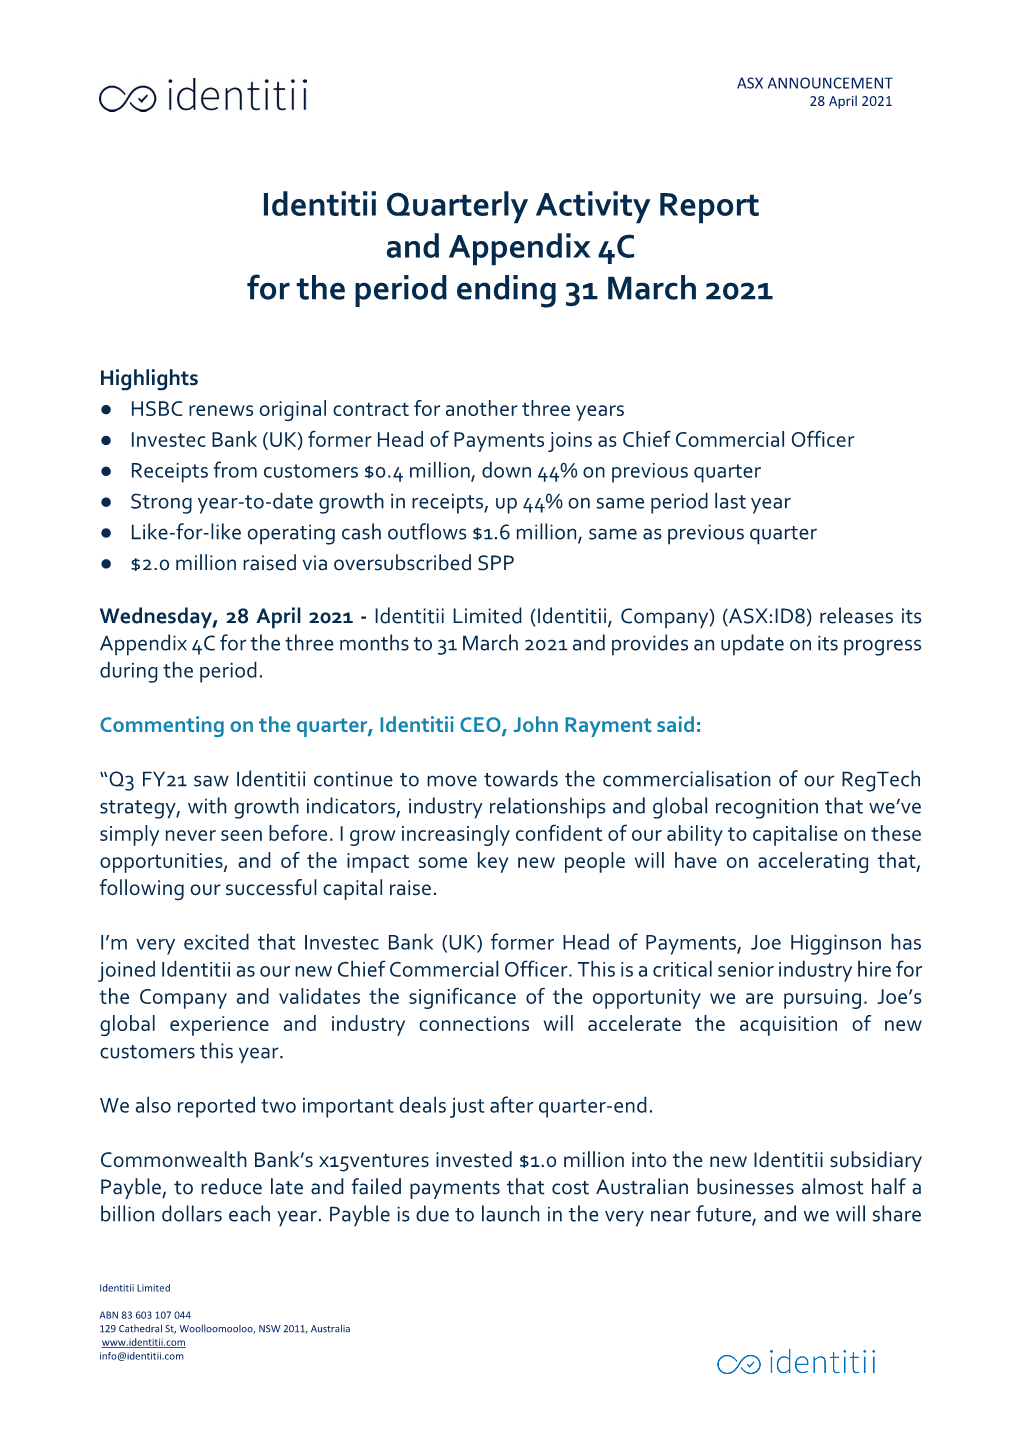 Identitii Quarterly Activity Report and Appendix 4C for the Period Ending 31 March 2021